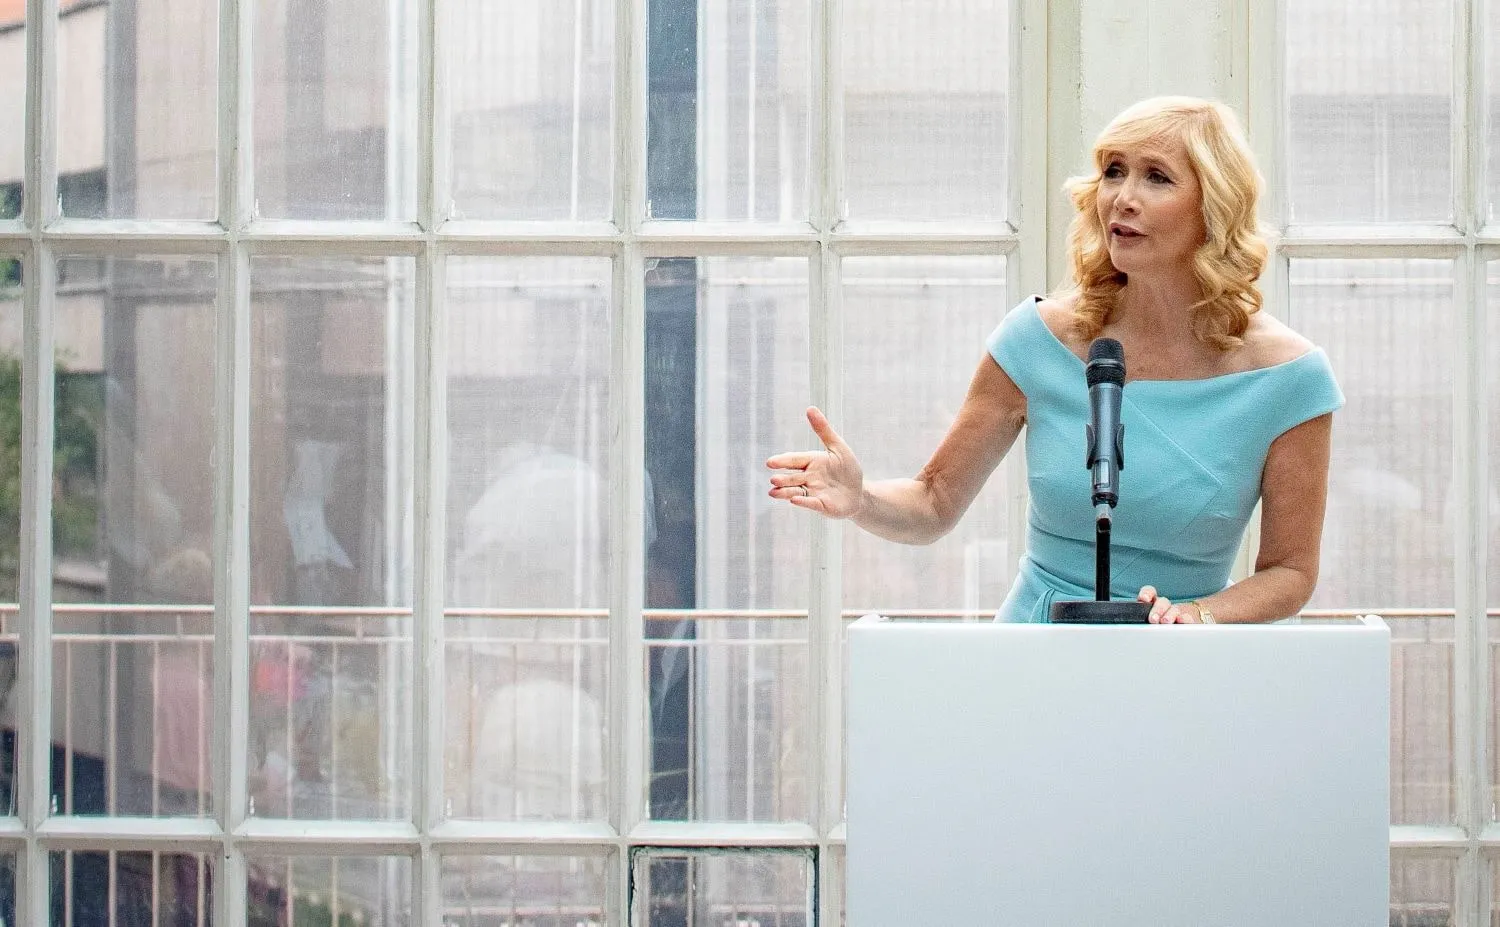 Tania Bryer speaking at an event in front of a large window